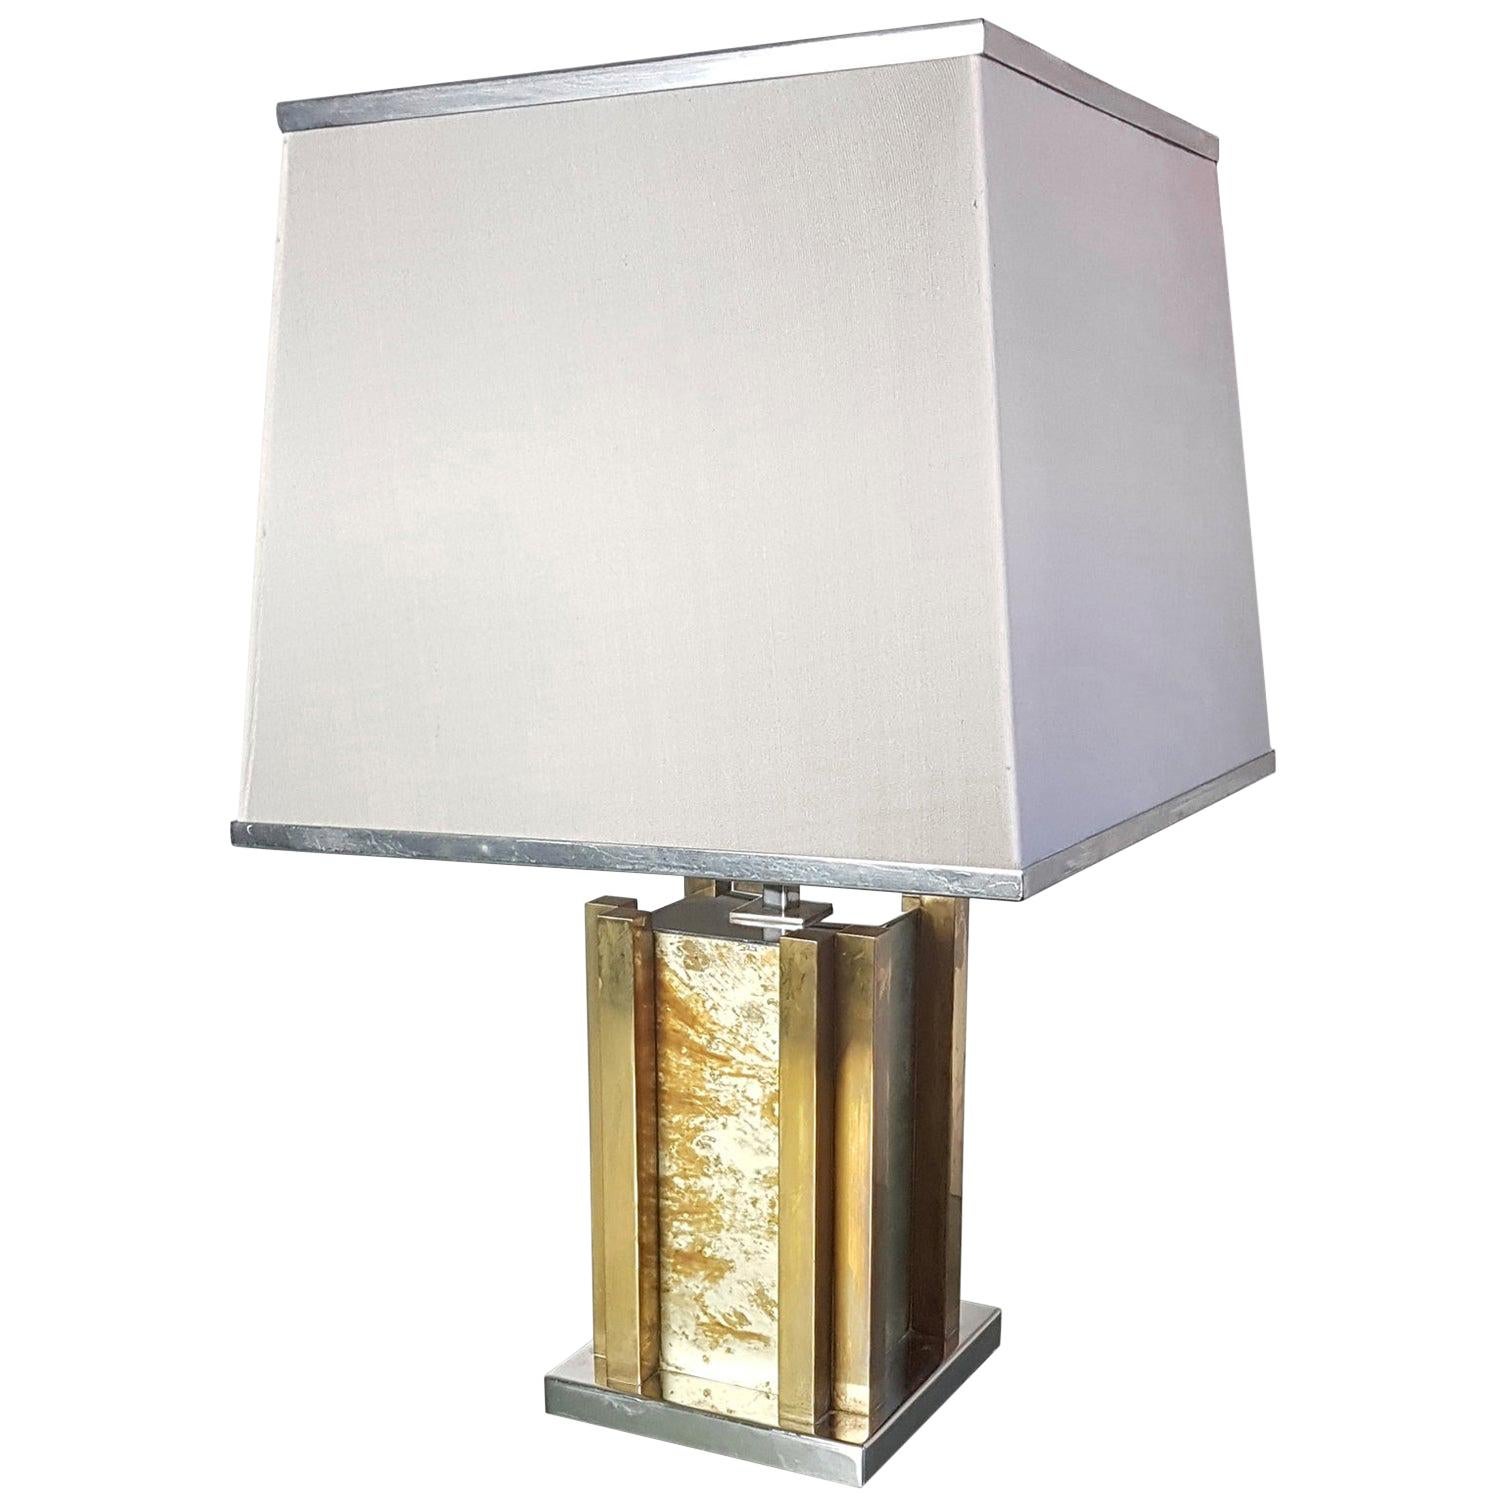 Romeo Rega Table Lamp in Brass and Chrome, Made in Italy For Sale